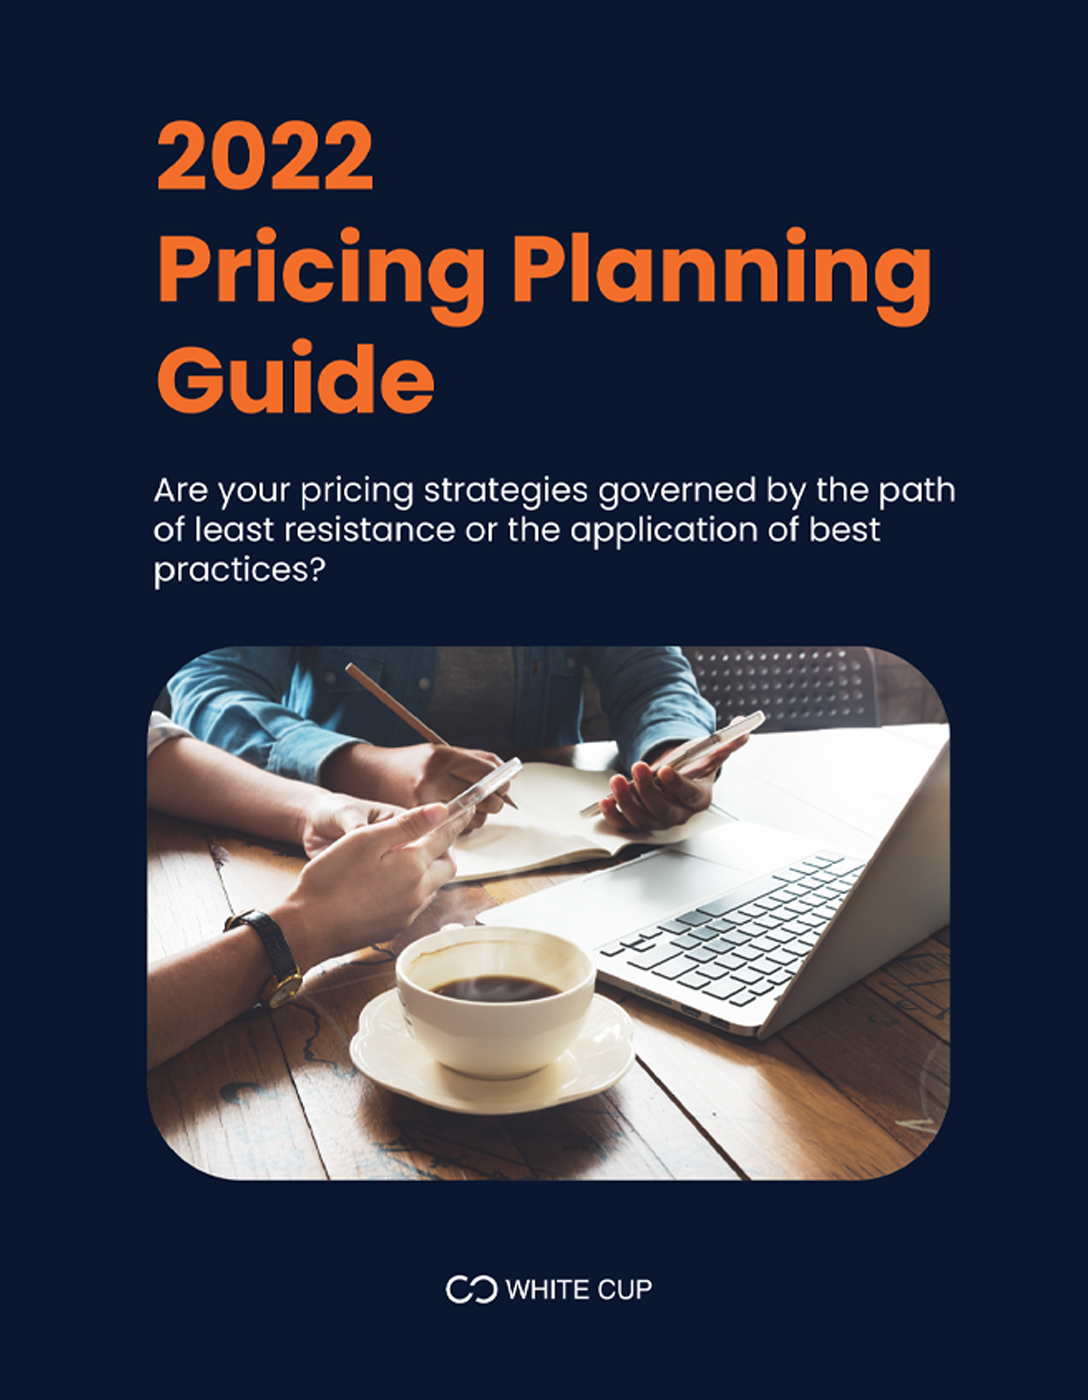 2022 Pricing Planning Guide Cover